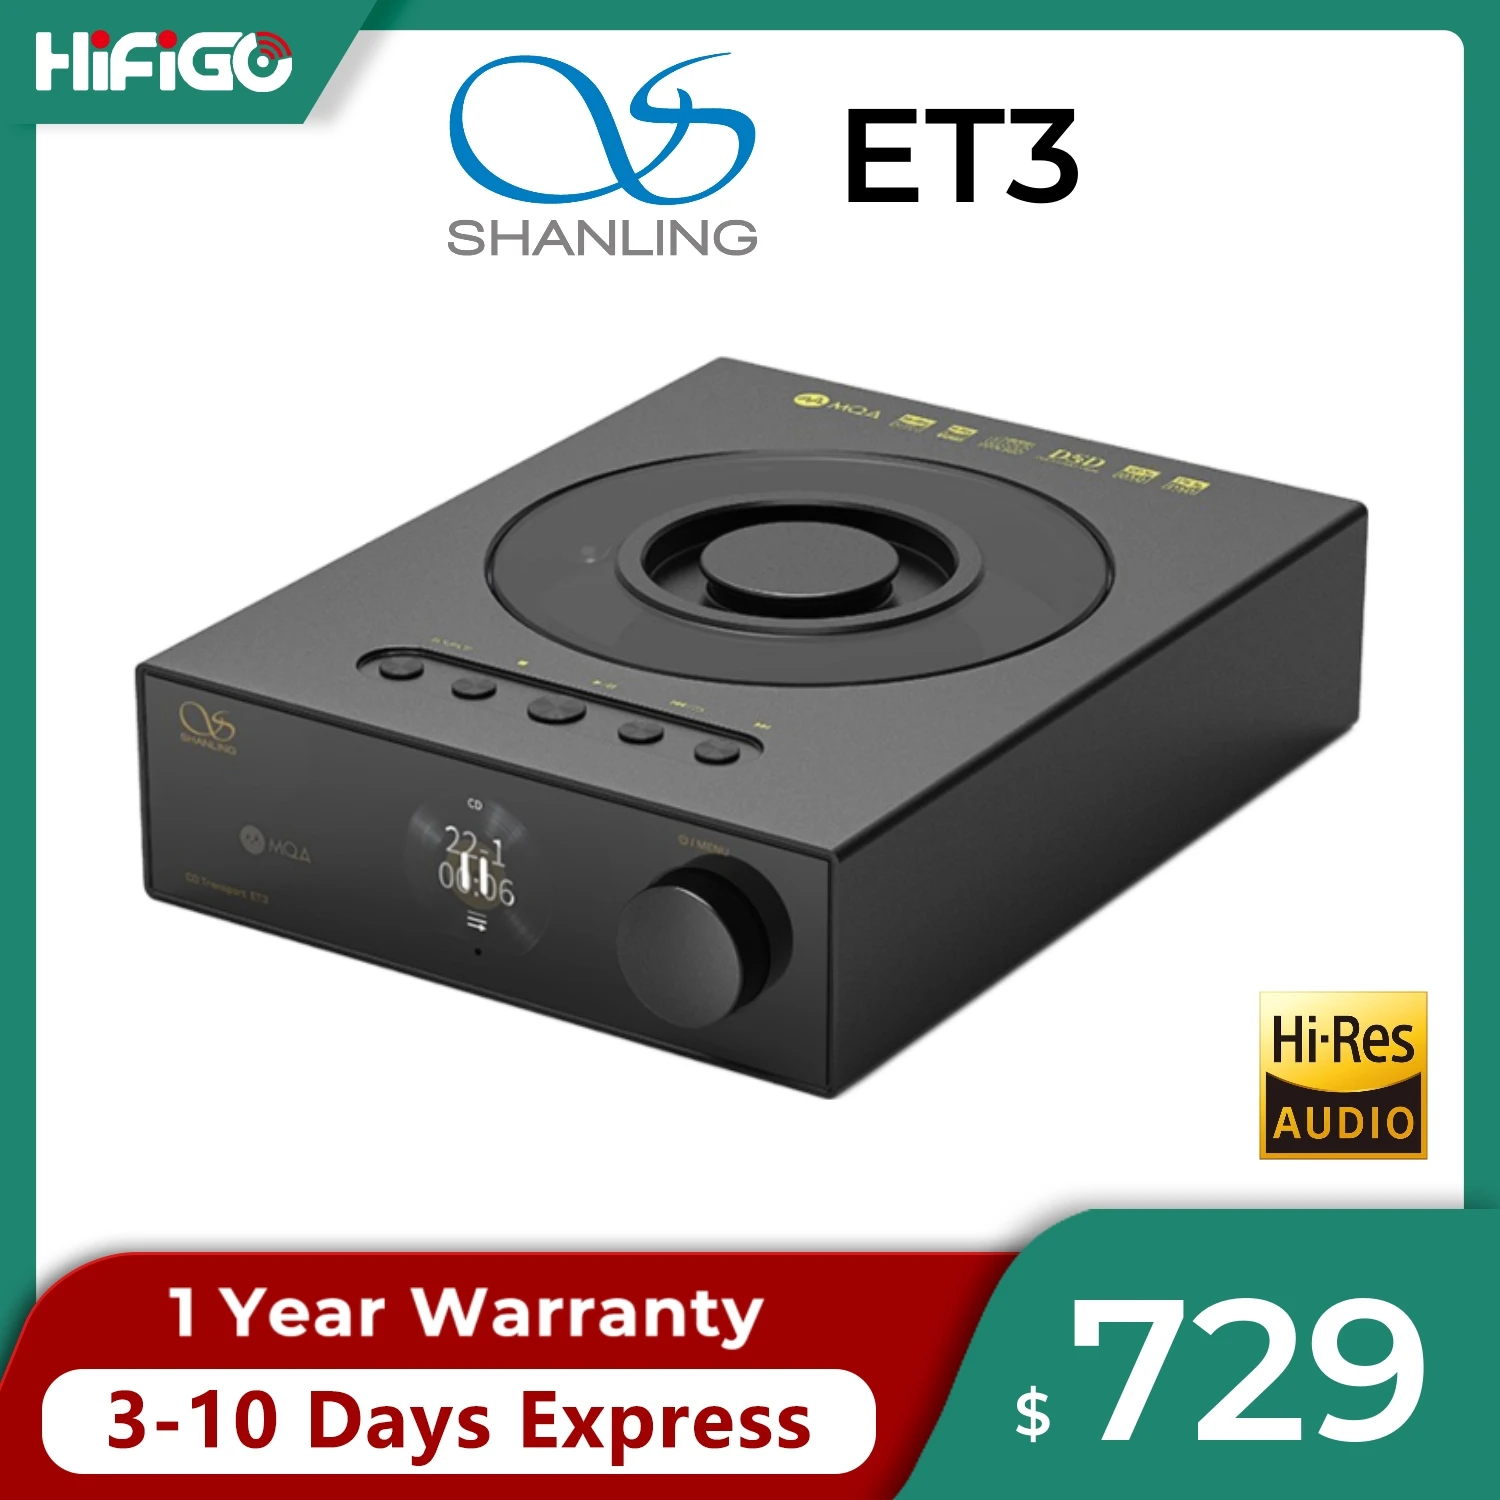 

SHANLING ET3 CD Transport Player Dedicated High-End Full-Featured Digital Turntable | All-to-DSD | USB & Wireless Playback | MQA